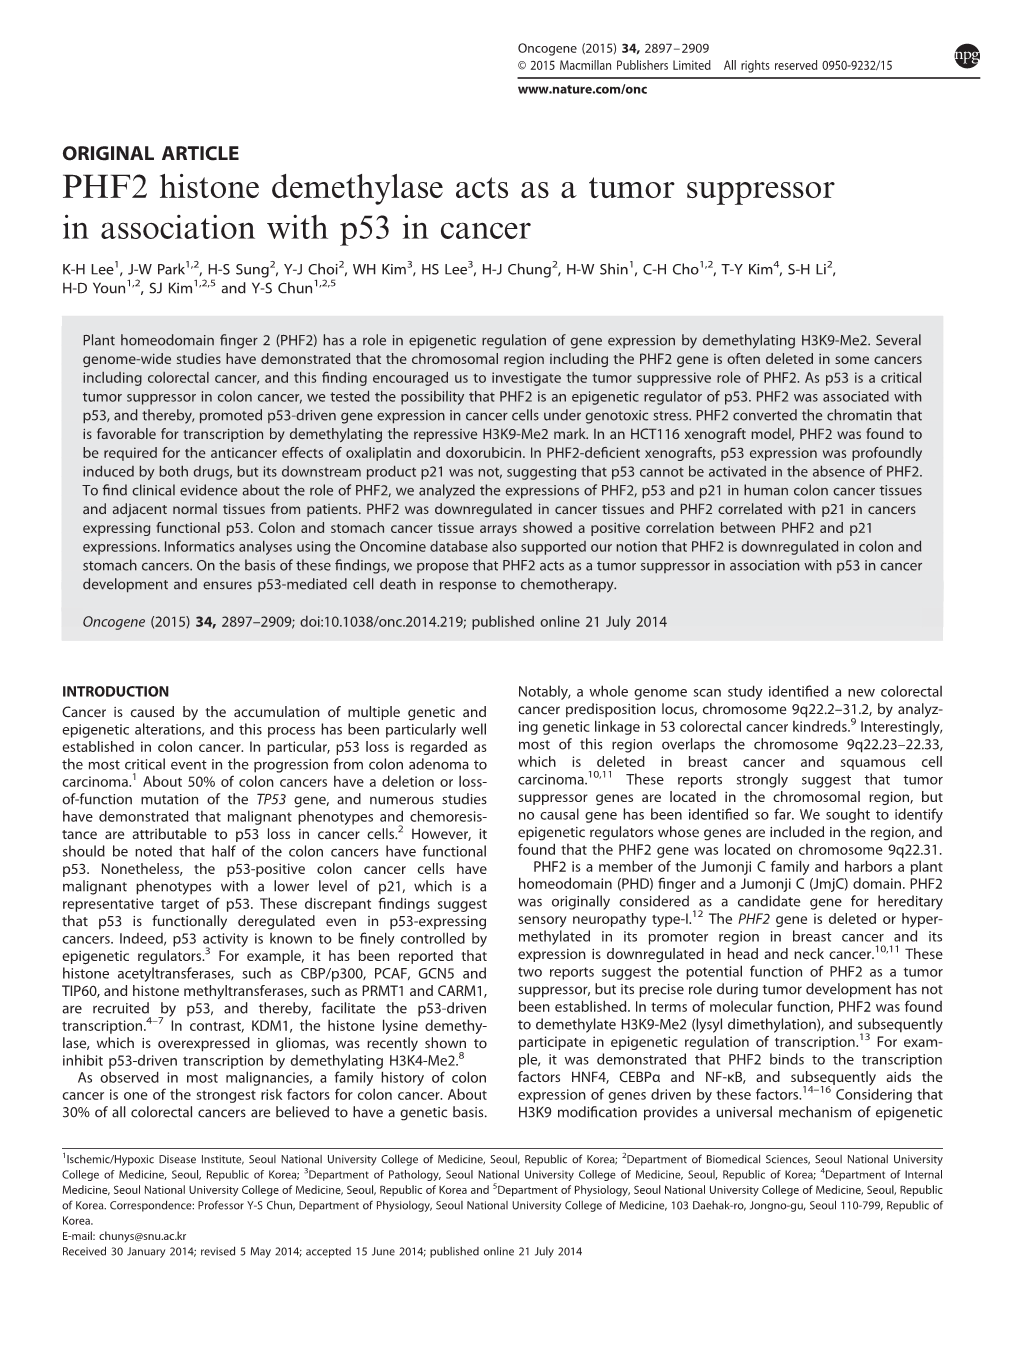 PHF2 Histone Demethylase Acts As a Tumor Suppressor in Association with P53 in Cancer